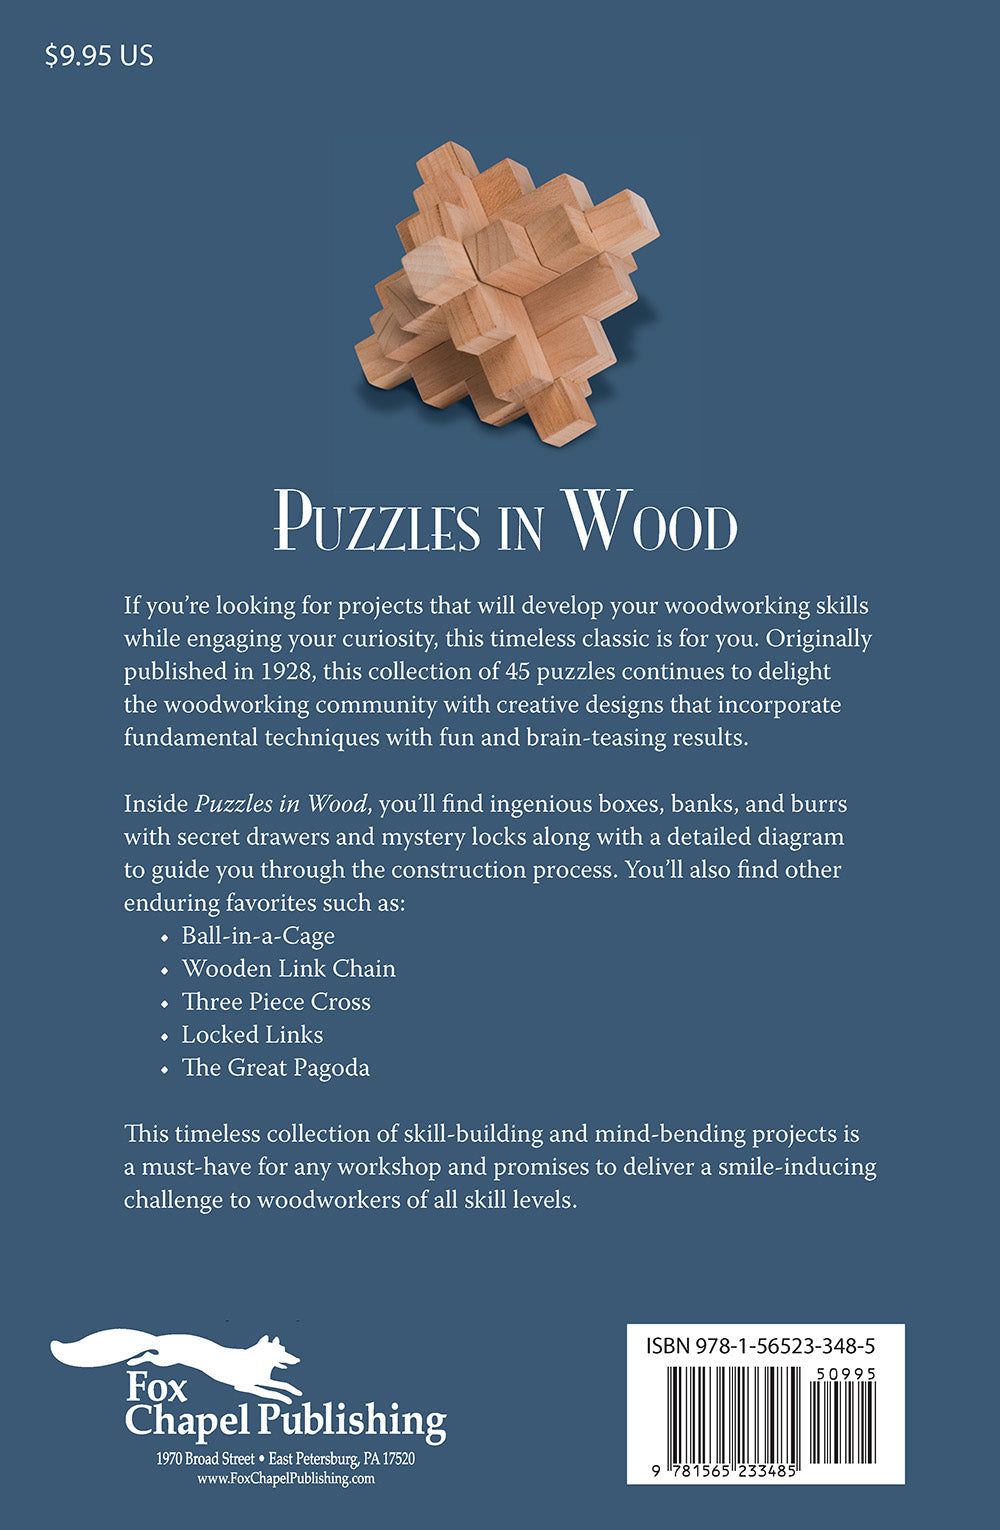 Puzzles in Wood